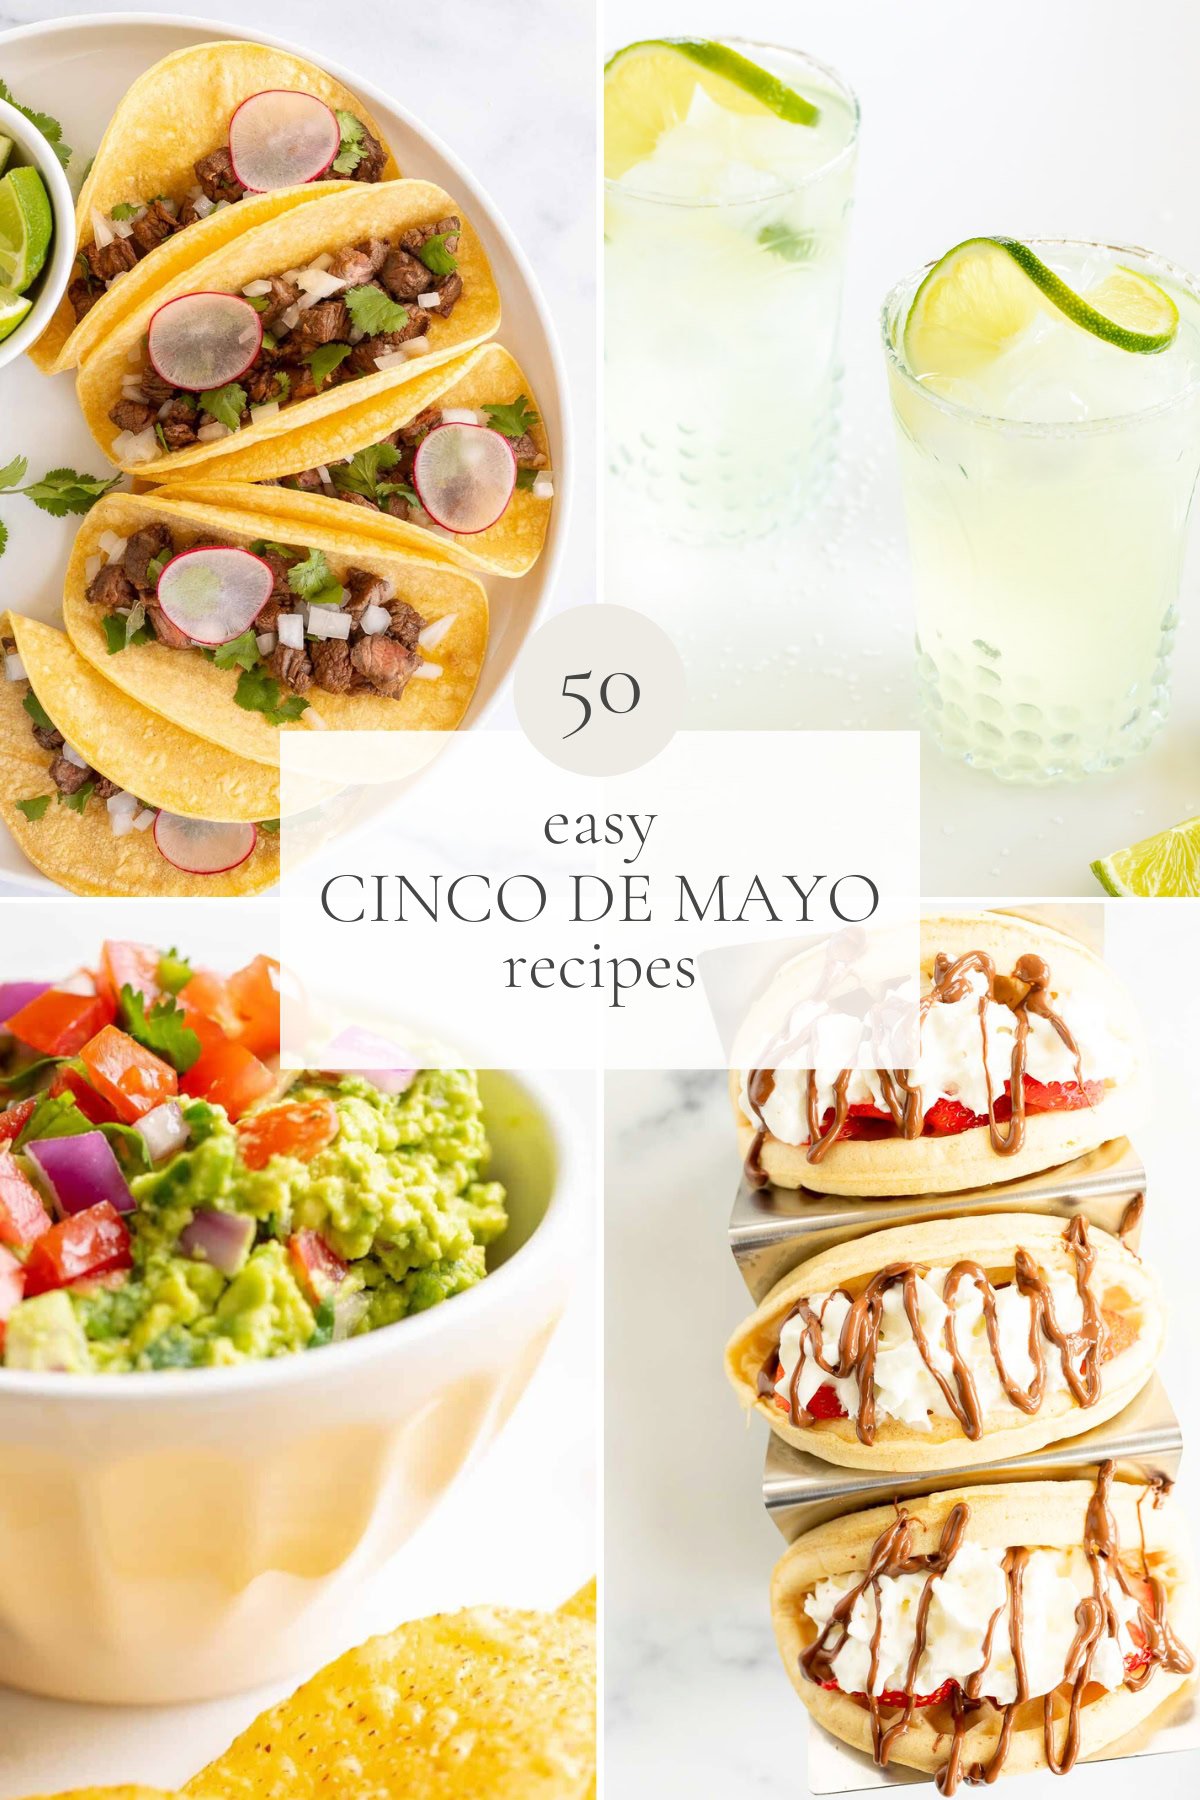 Collage of the Cinco de Mayo menu including tacos, a lime beverage, and a dessert topped with caramel, titled "50 Easy Cinco de Mayo Recipes.